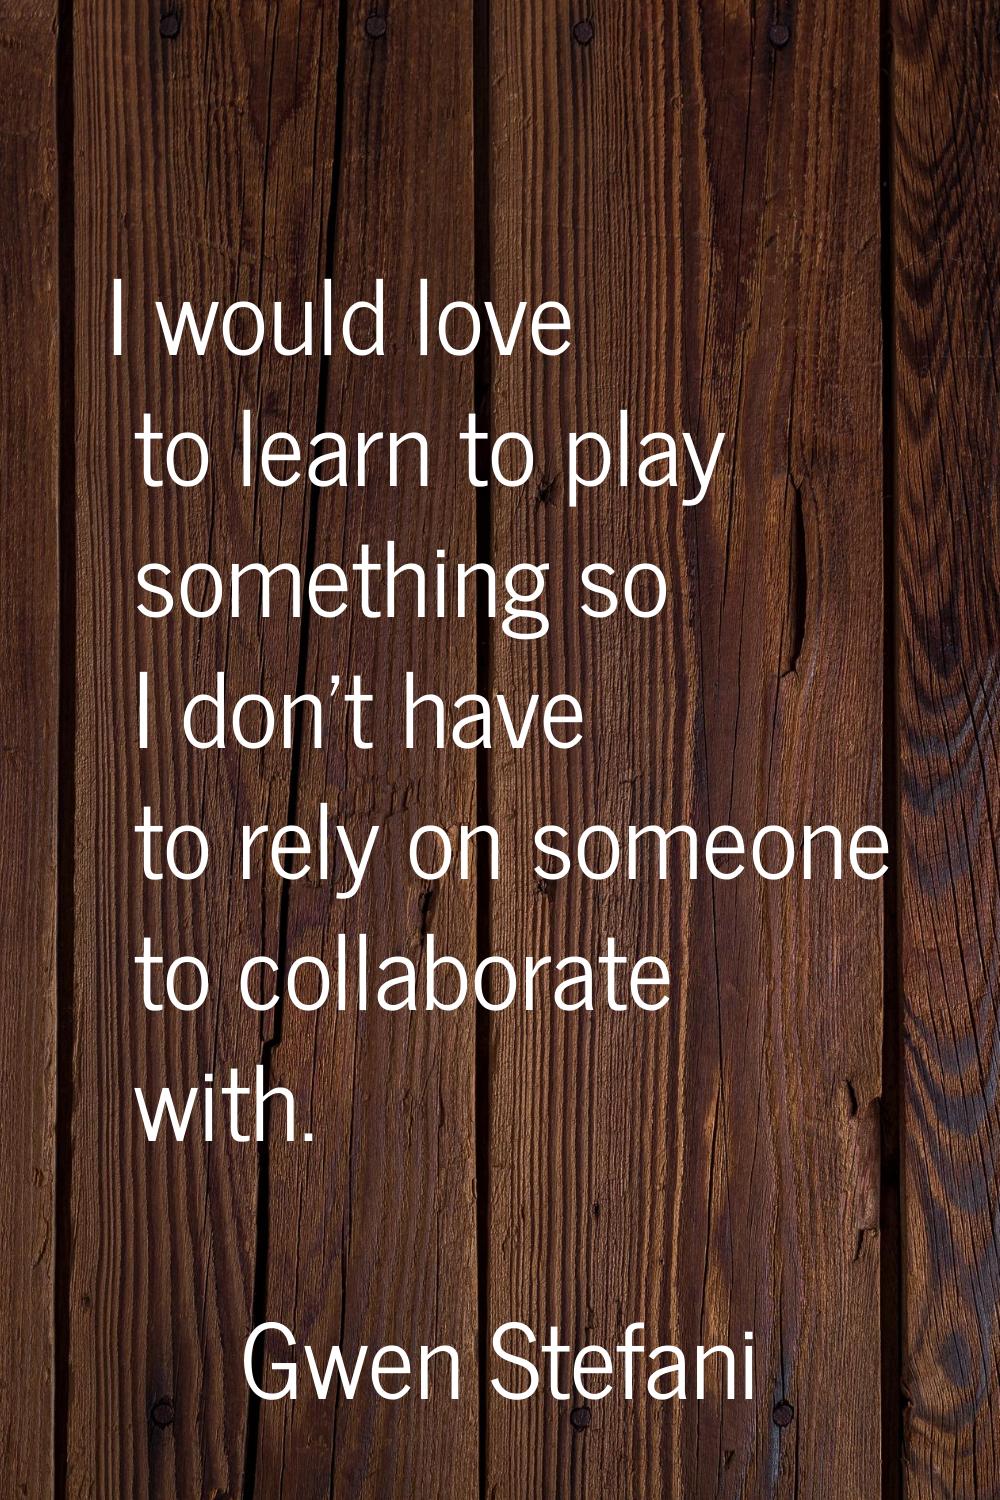 I would love to learn to play something so I don't have to rely on someone to collaborate with.